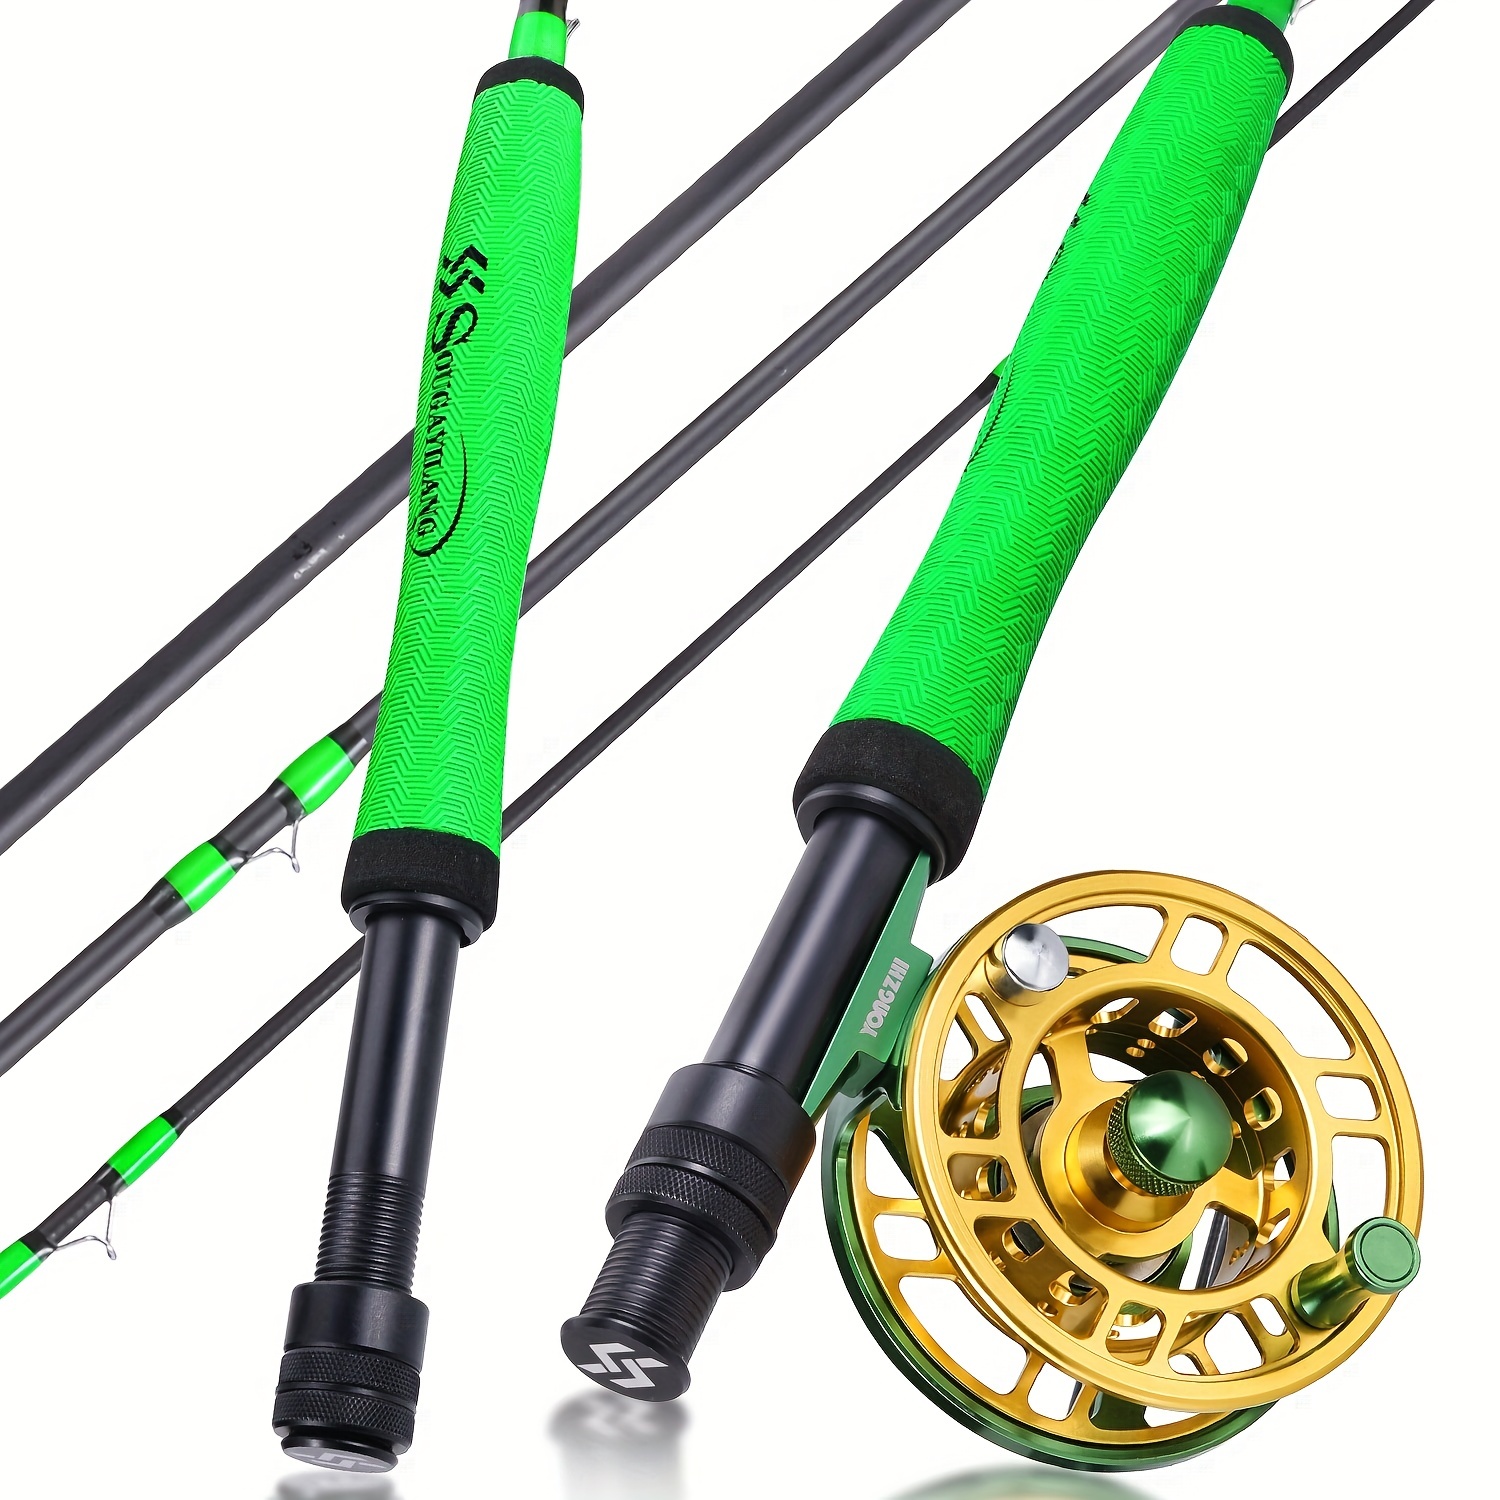 Sougayilang Fly Fishing Rod Reel Combos With High Carbon Body Fly Rod And  CNC-machined Aluminum Alloy Fly Reel Fishing Kit, Fly Fishing Complete Start